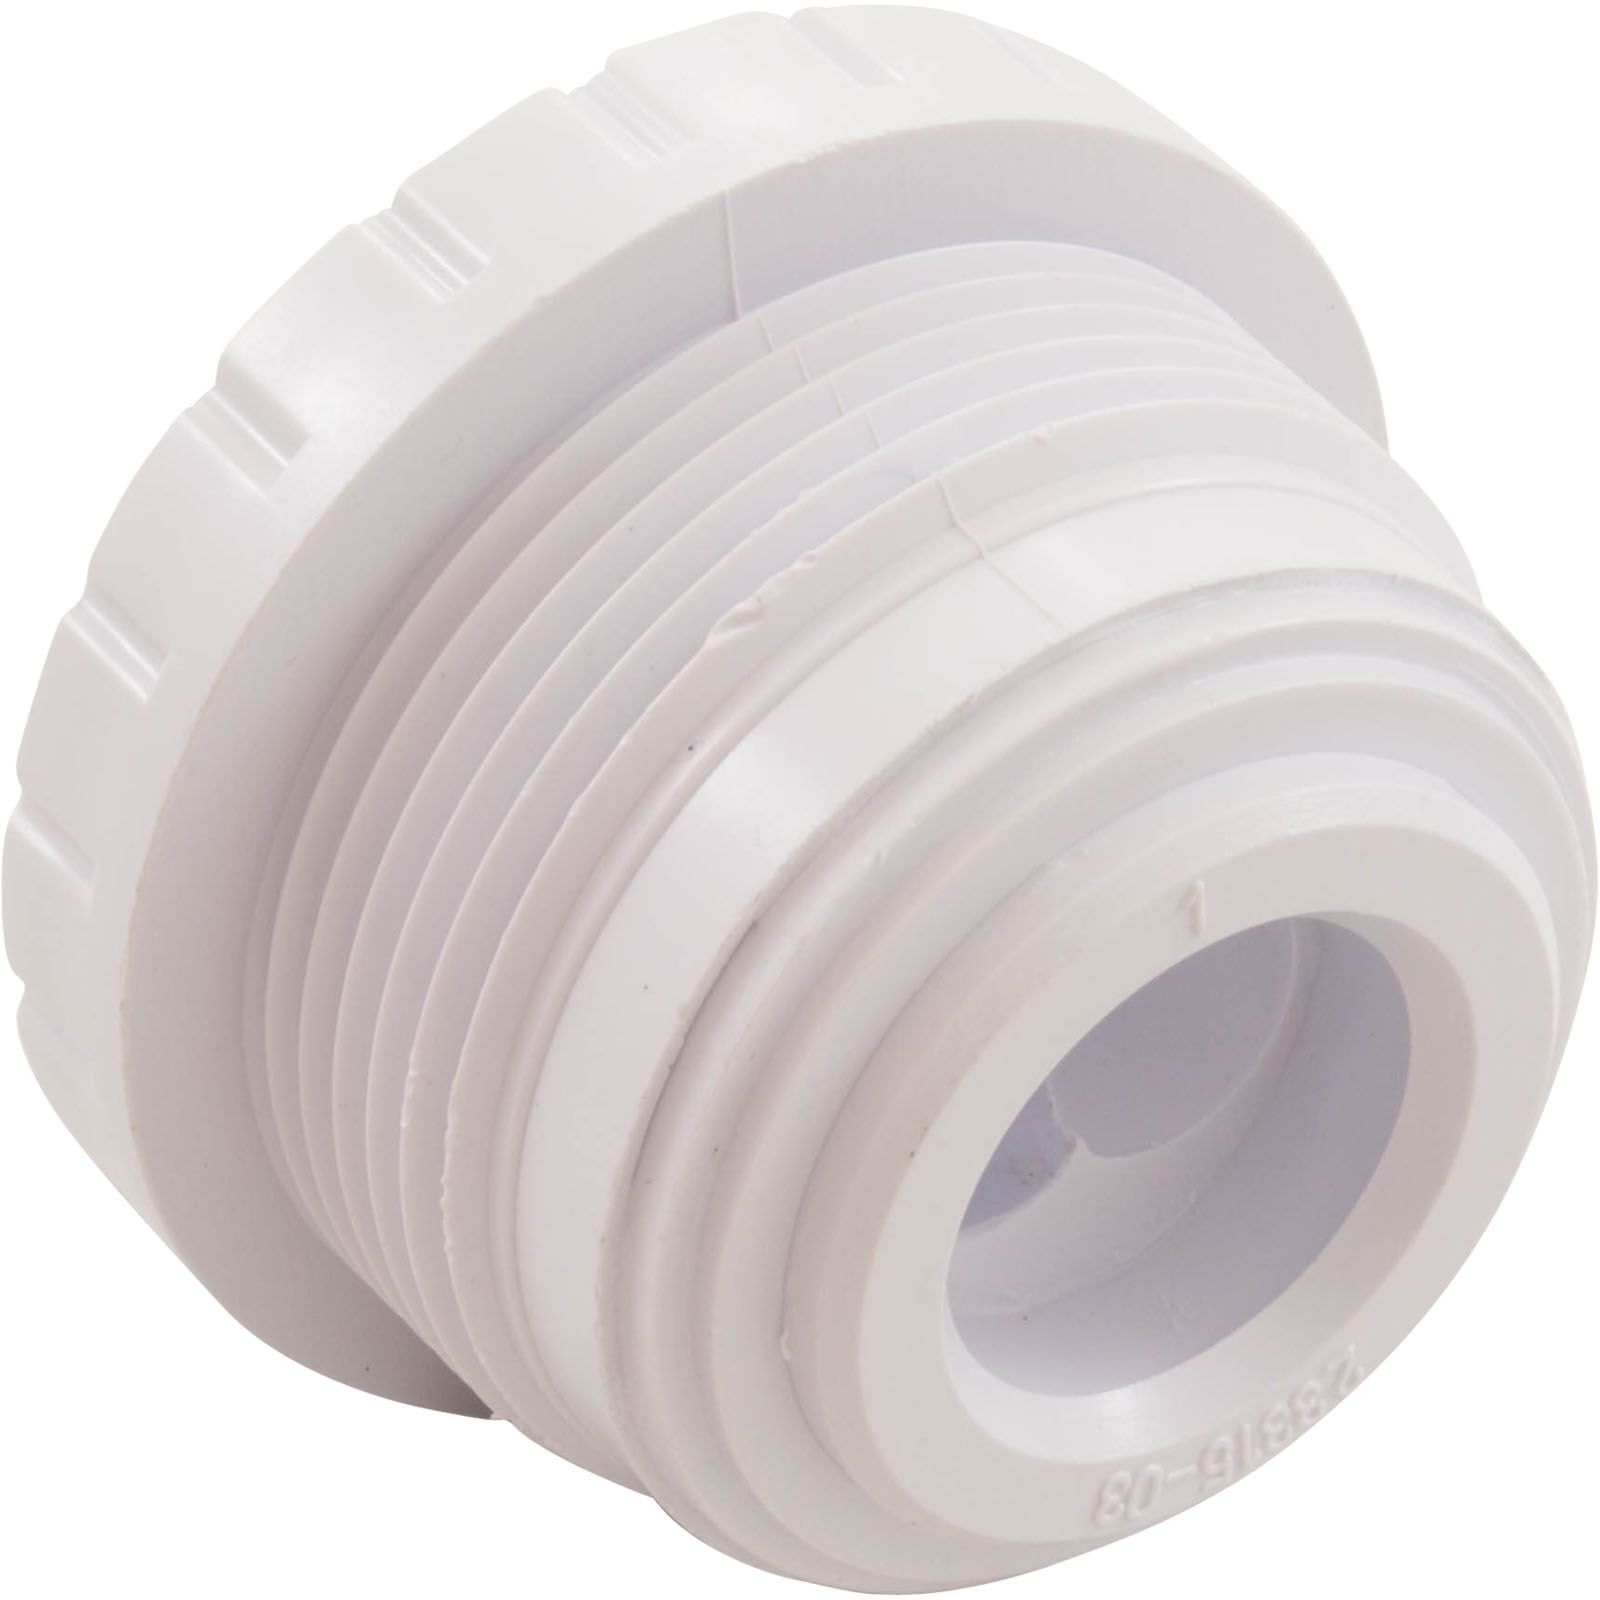 Picture of 23315-030-000 Jet Intl CMP Spa Master Pulsator Ribbed White